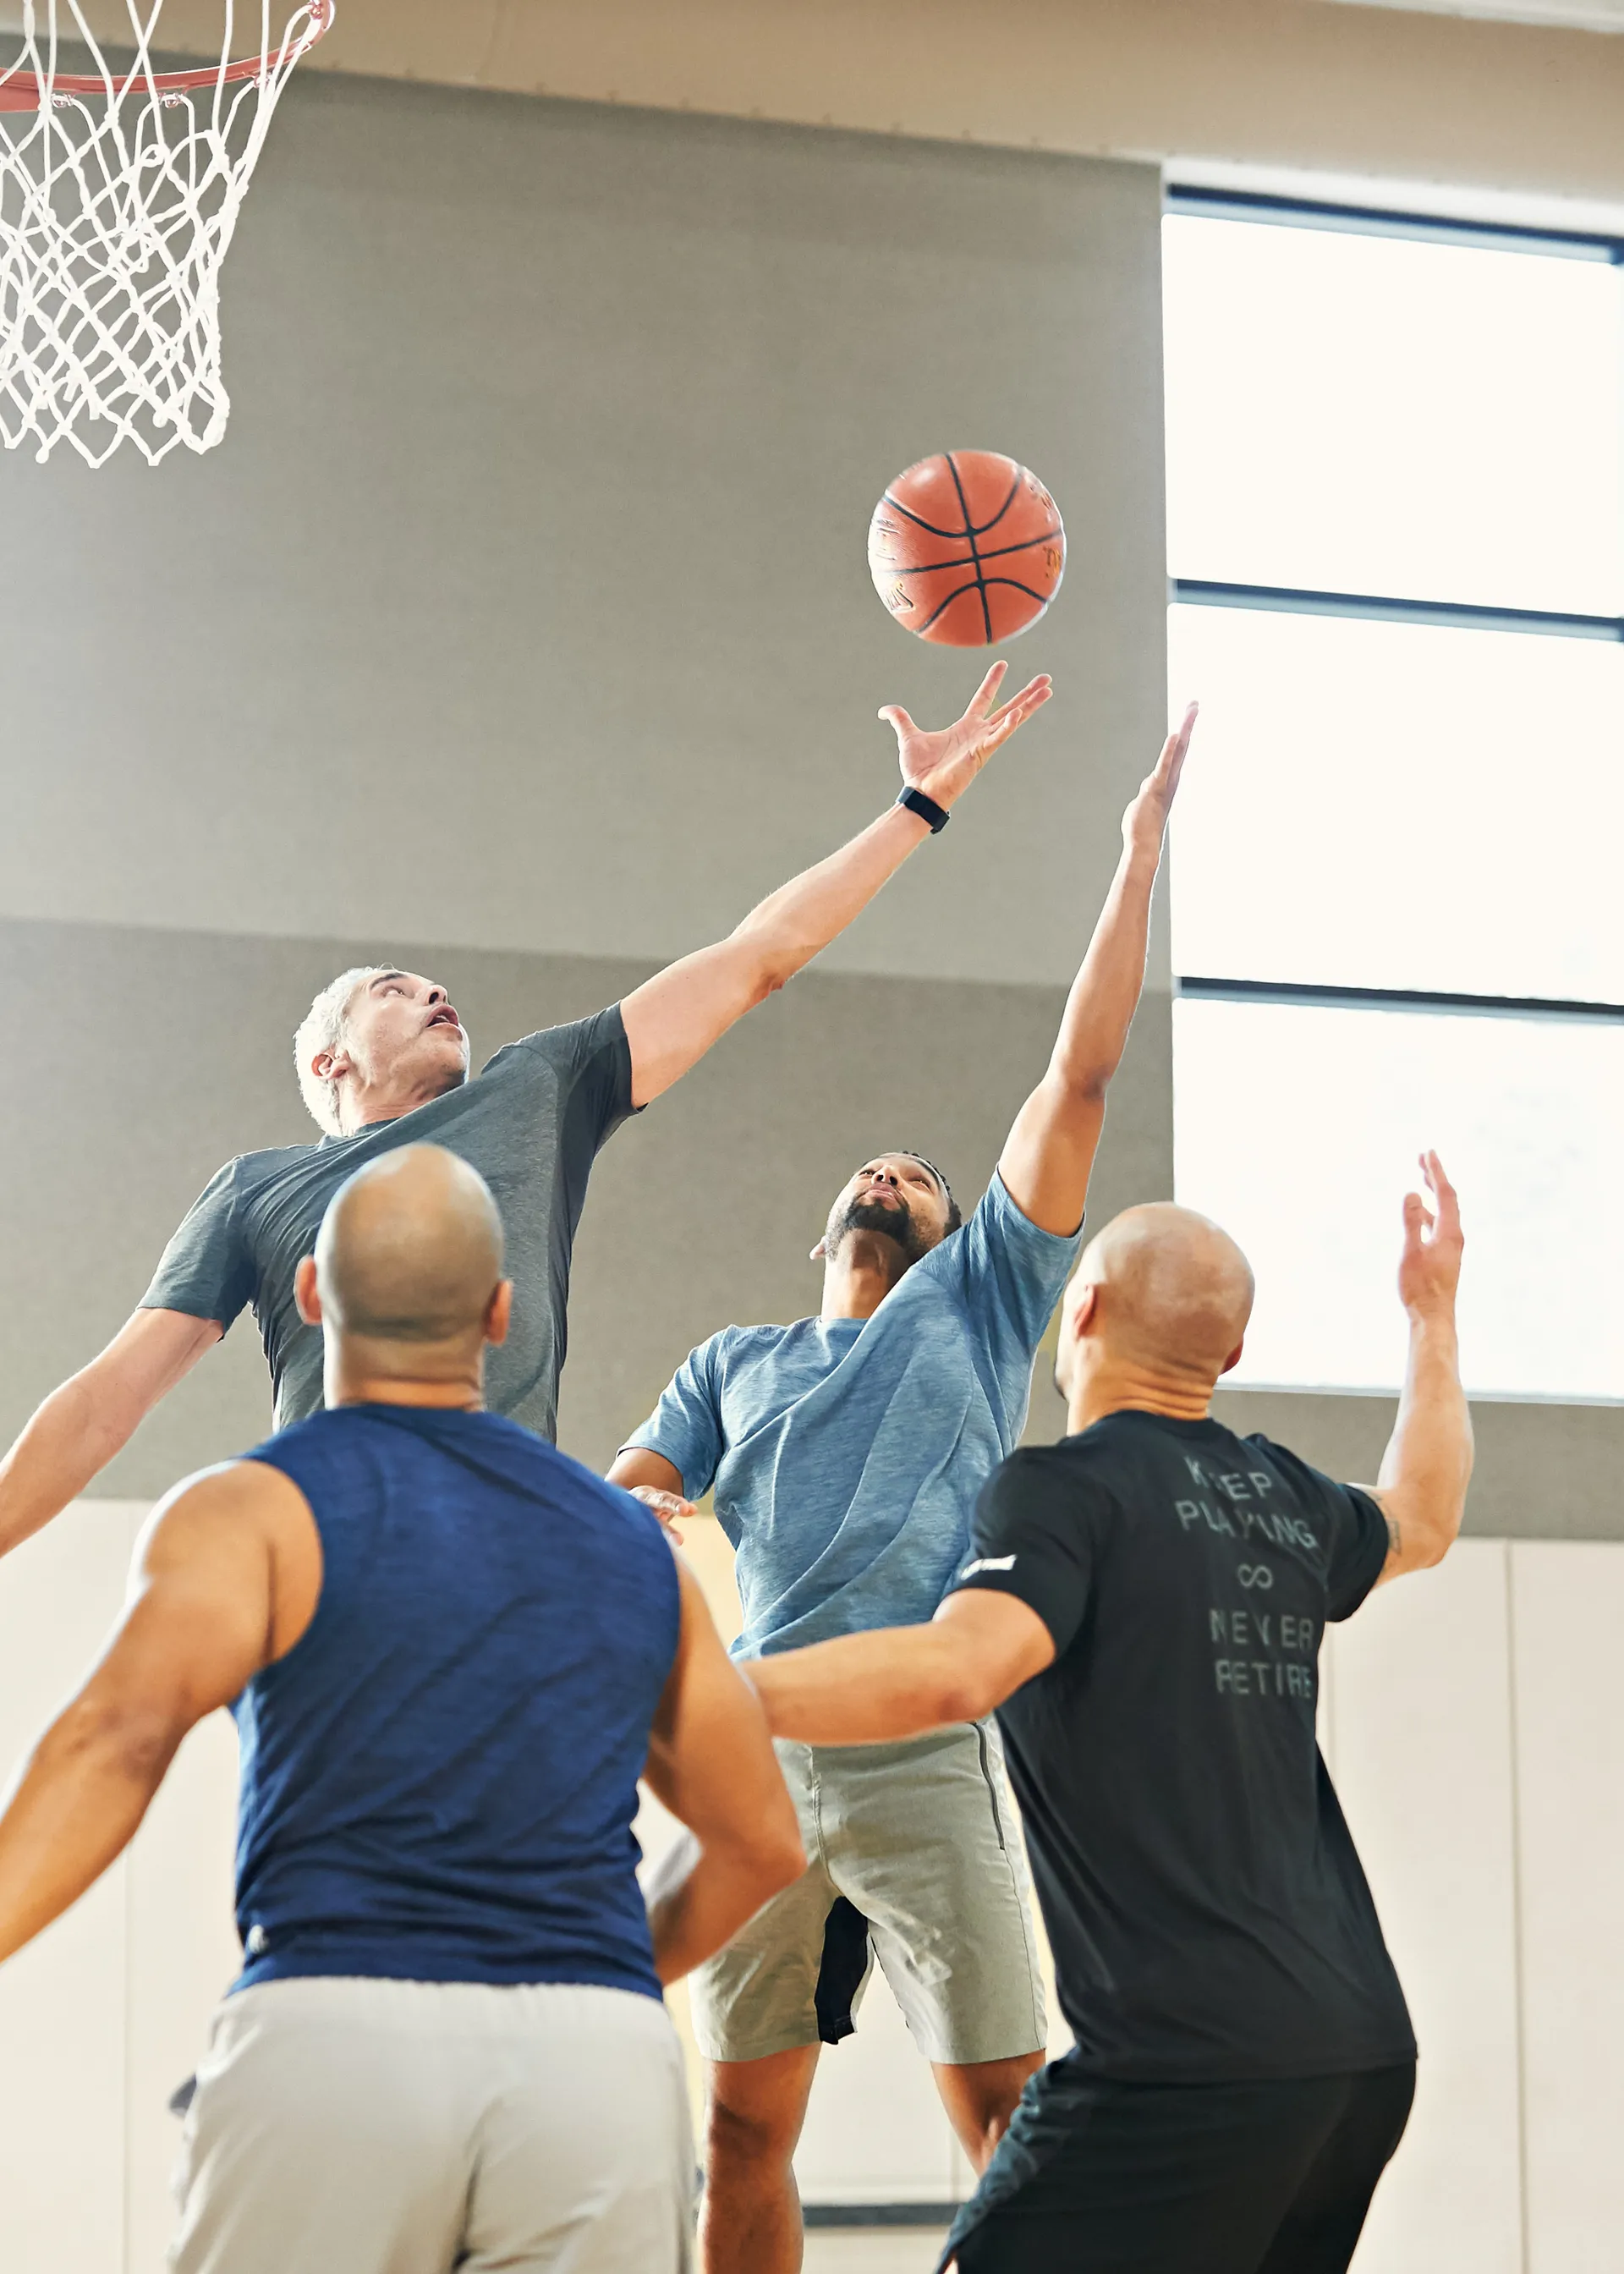 Four men playing basketball in an indoor gym where one player is jumping for the ball.